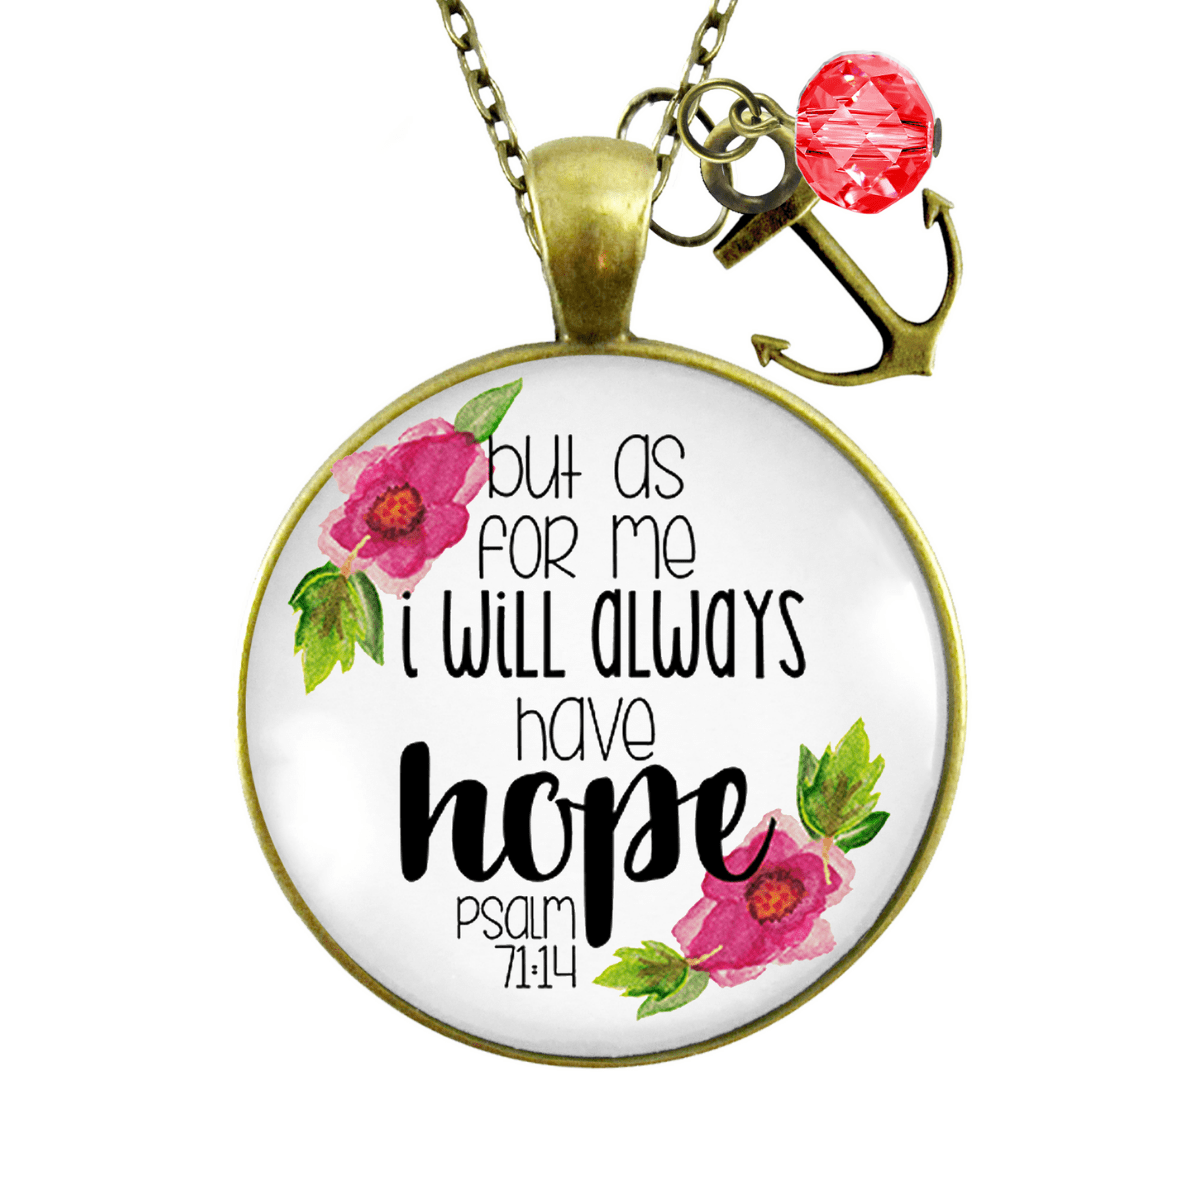 Gutsy Goodness Always Have Hope Bible Necklace Pendant Psalm Quote Theme Anchor - Gutsy Goodness Handmade Jewelry;Always Have Hope Bible Necklace Pendant Psalm Quote Theme Anchor - Gutsy Goodness Handmade Jewelry Gifts